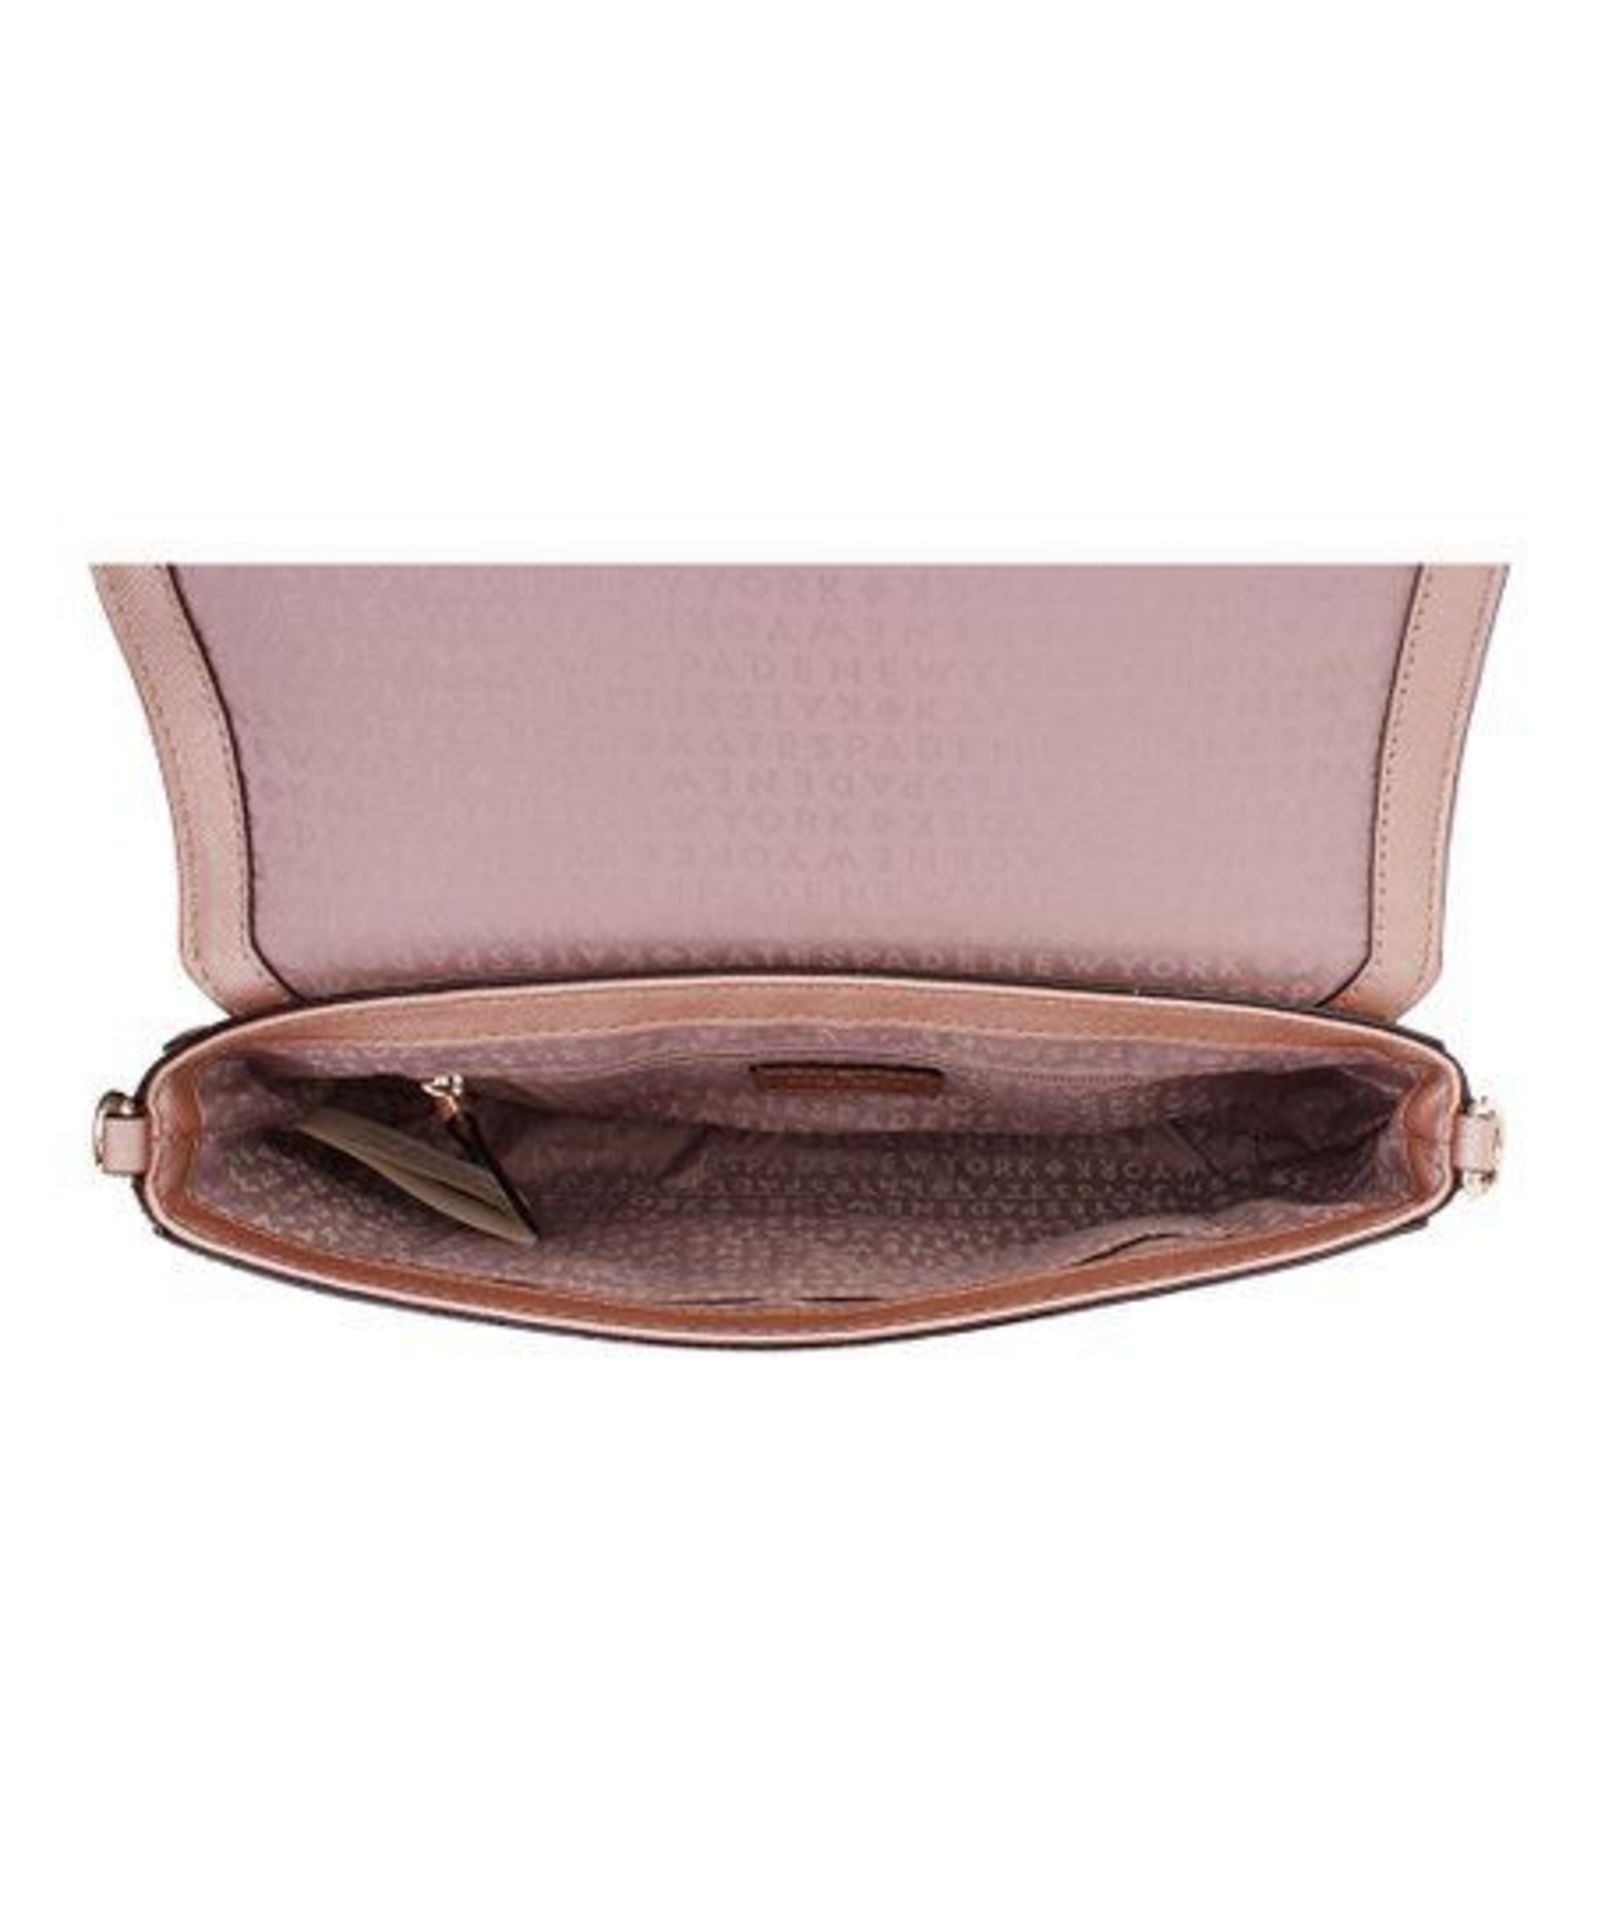 Kate Spade, Rose Gold Greer Laureal Way Leather Crossbody Bag (New With Tags) [Ref: - Image 2 of 4